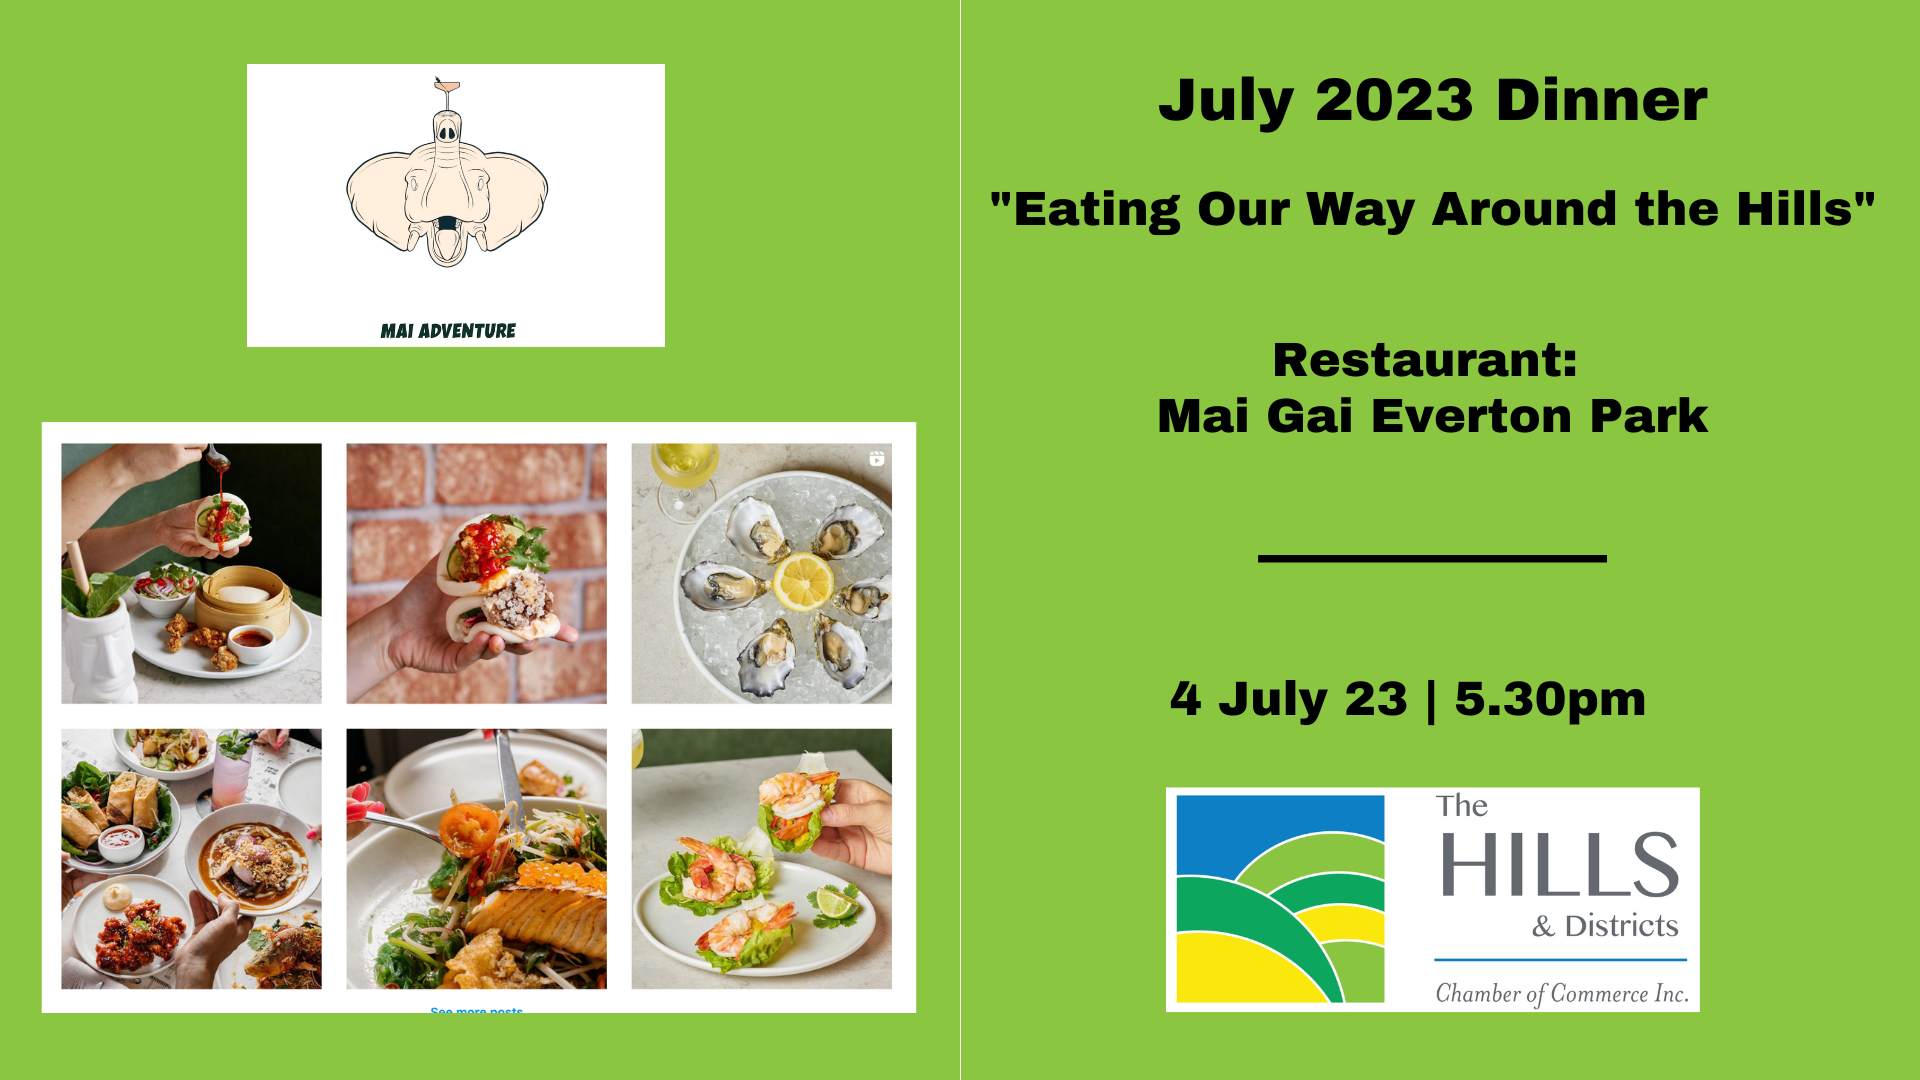 Dinners » July 2023 “Eating Our Way Around the Hills”